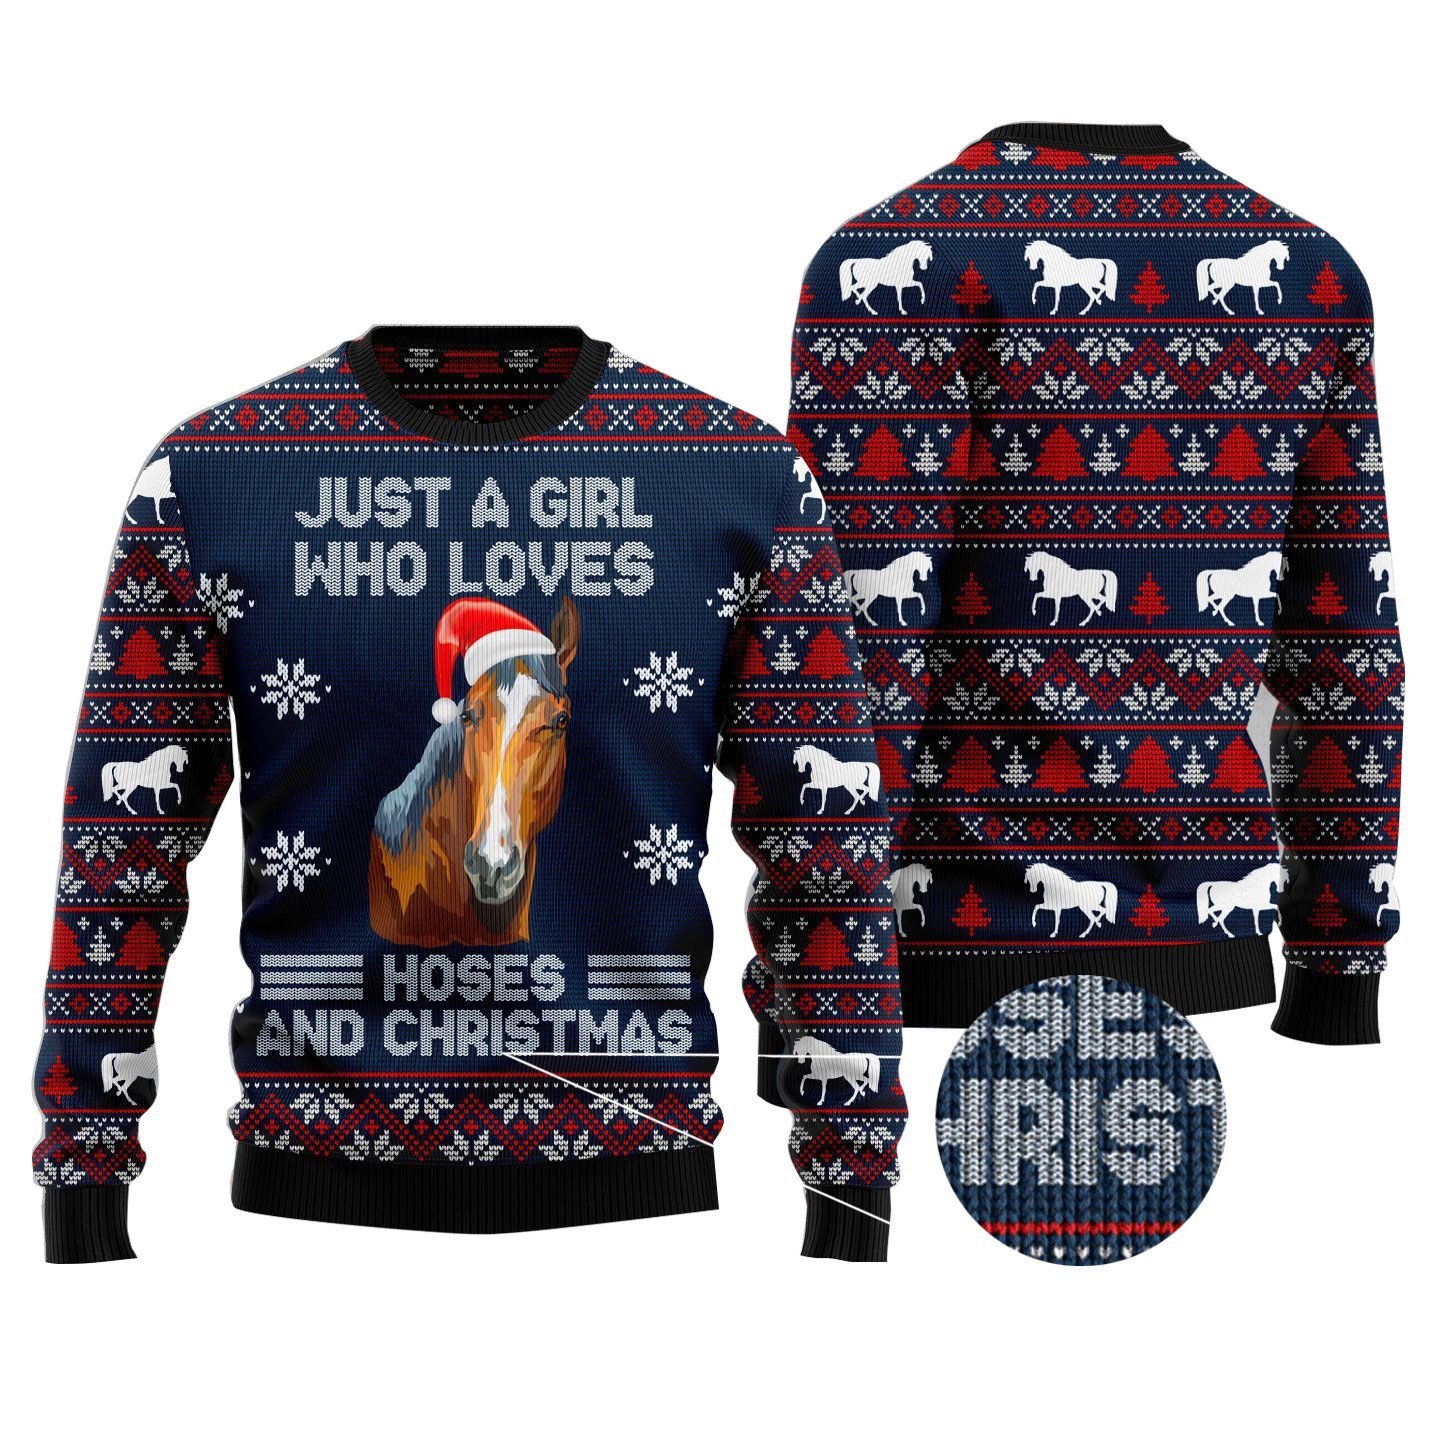 Just A Girl Who Love Horse And Christmas Christmas 3D Sweater AOP Sweater Navy S